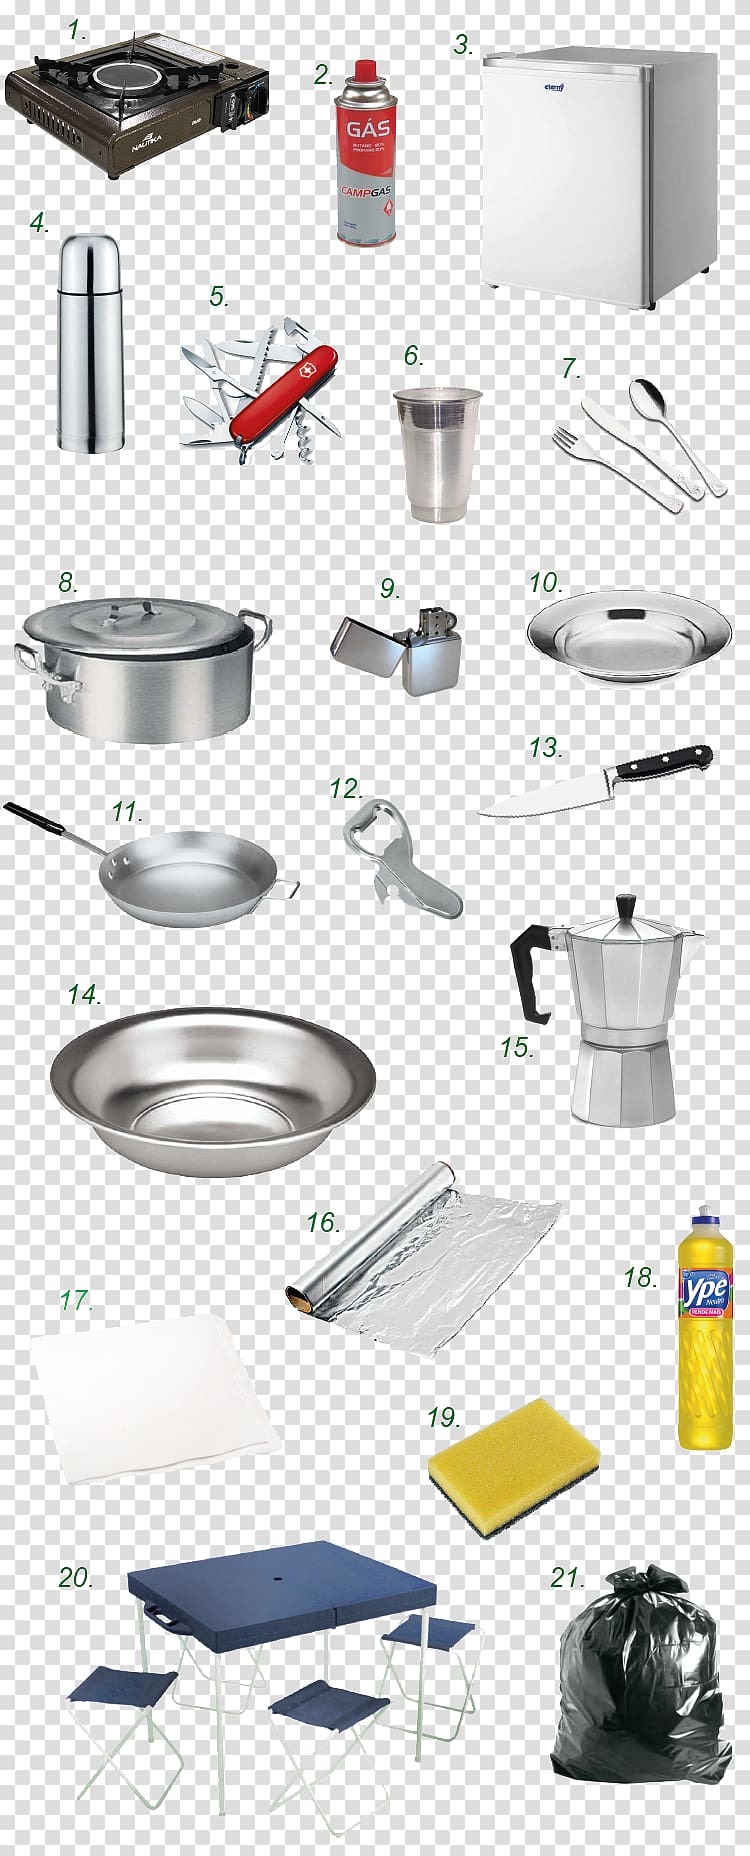 Camping Tent Sleeping Mats Cookware Food processor, tacky goes to camp transparent background PNG clipart